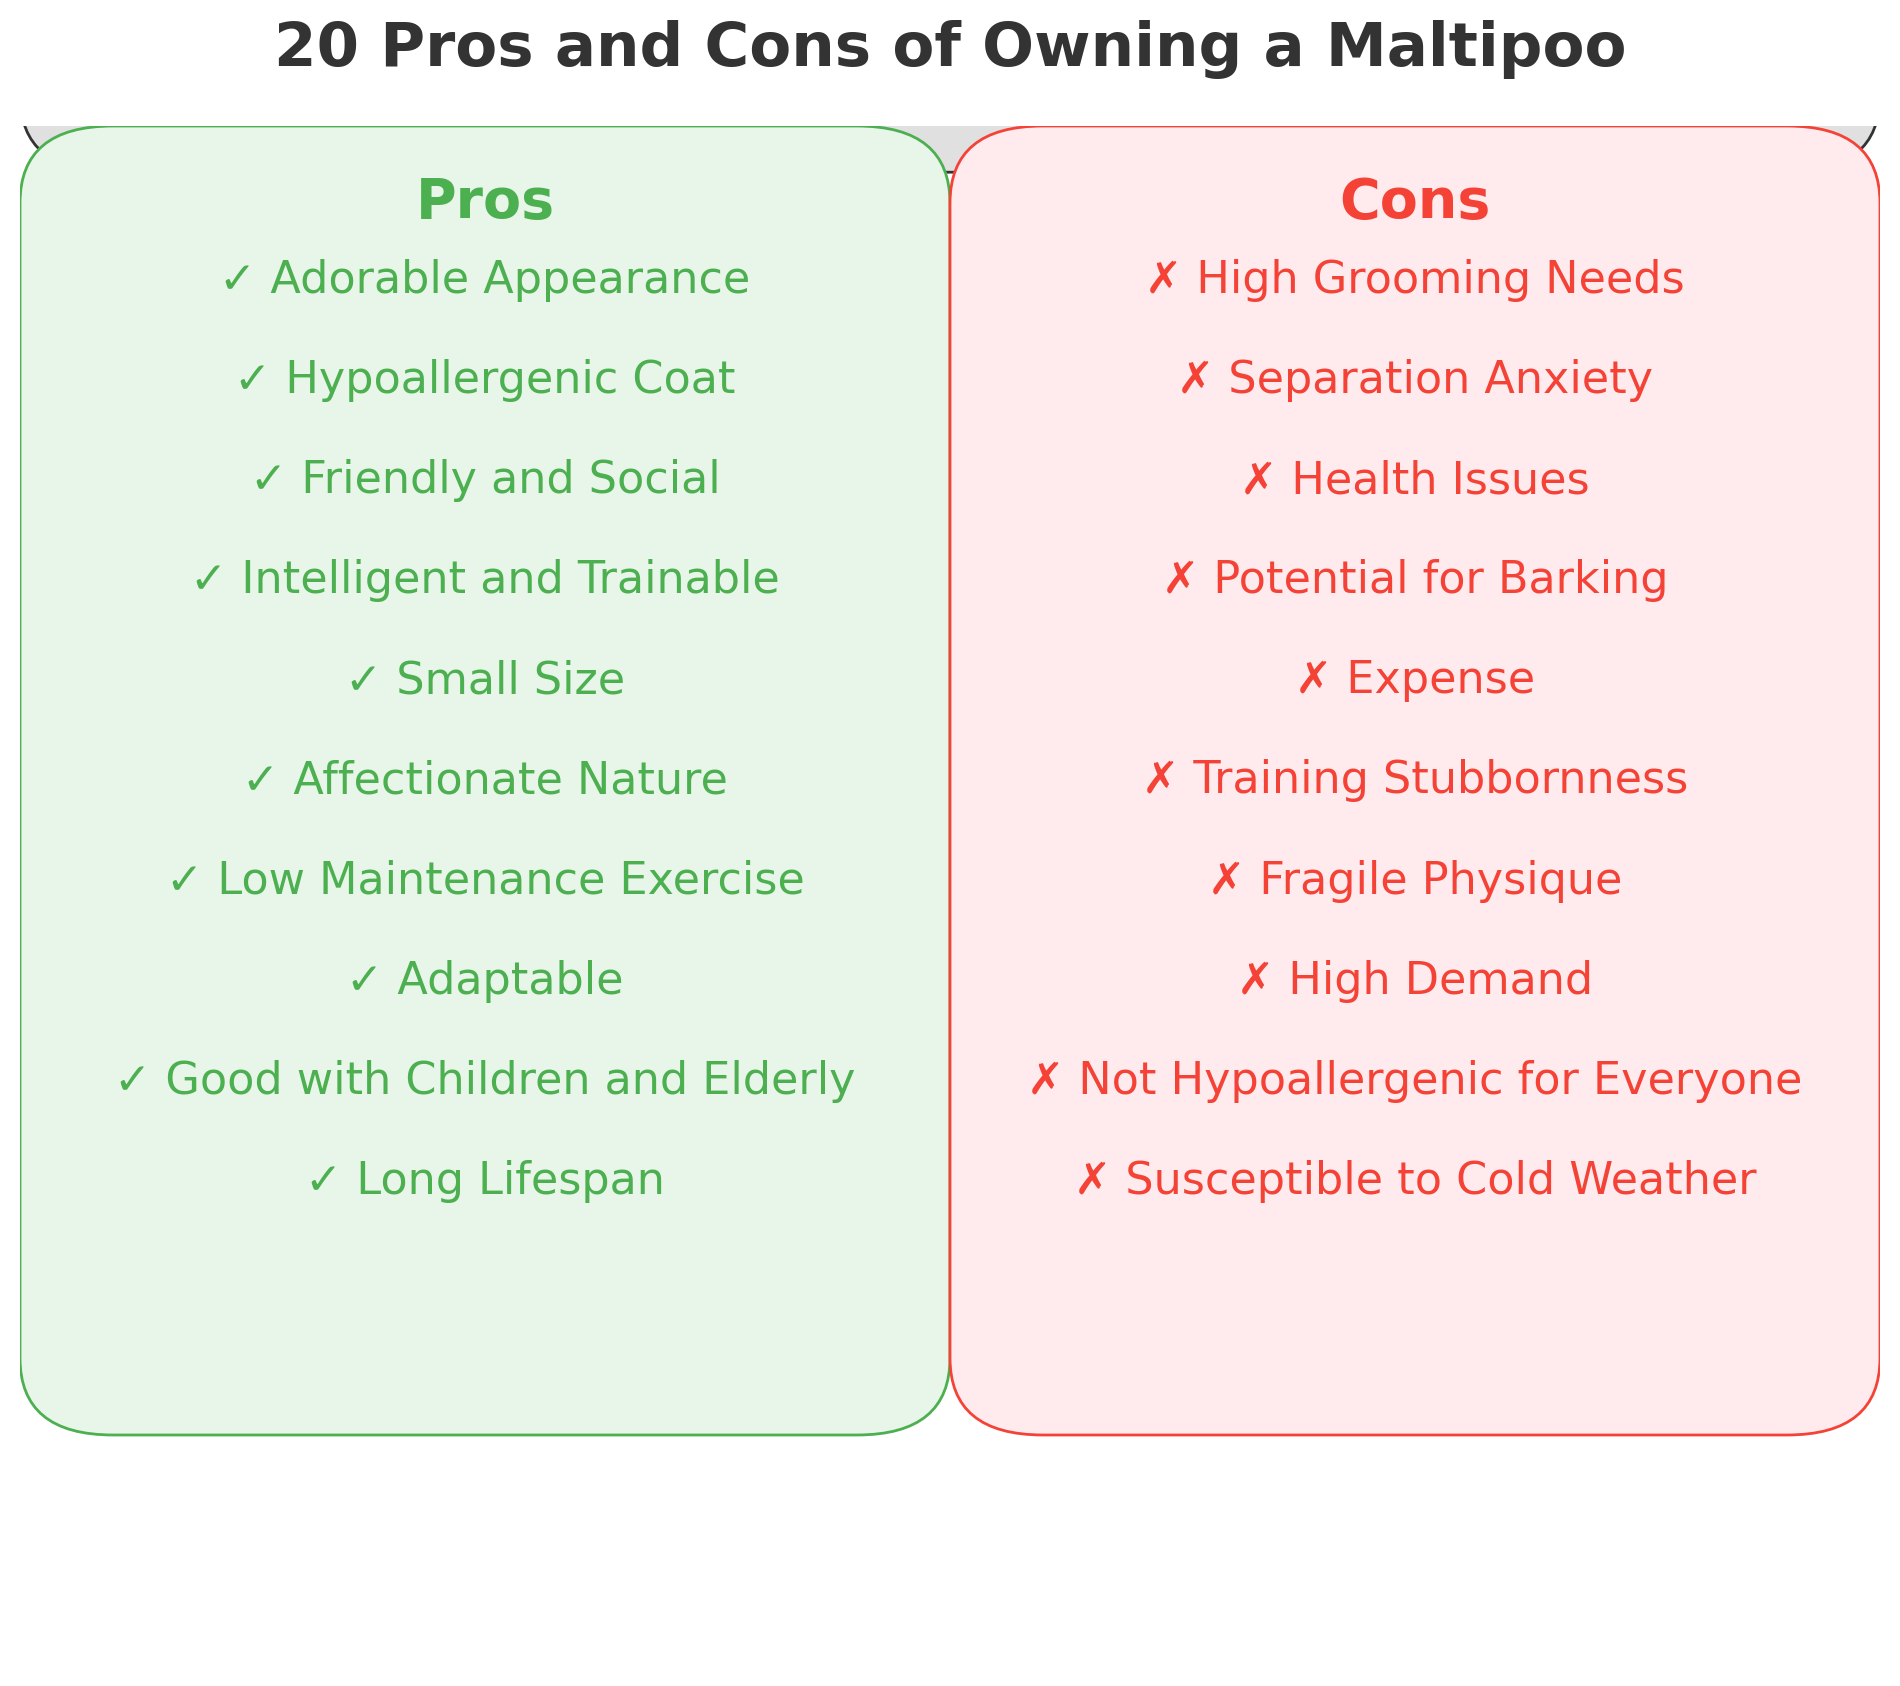 maltipoo pros and cons chart